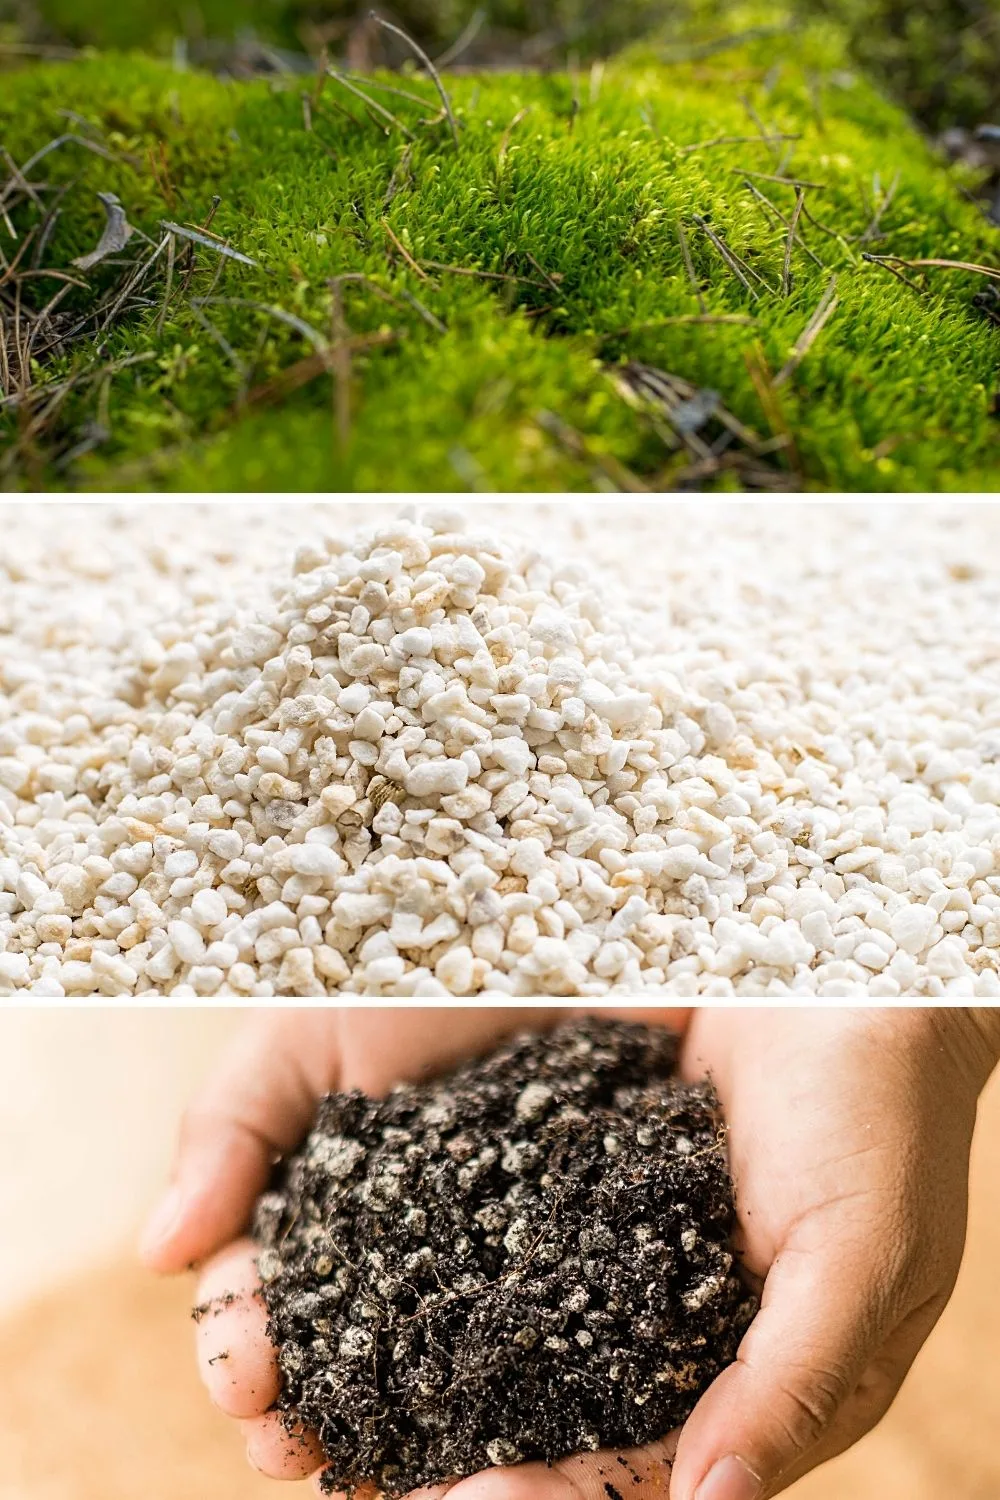 You can mix 1 part of peat moss, 1 part of perlite, and 1 part of cactus mix to ensure your Hoya's healthy growth